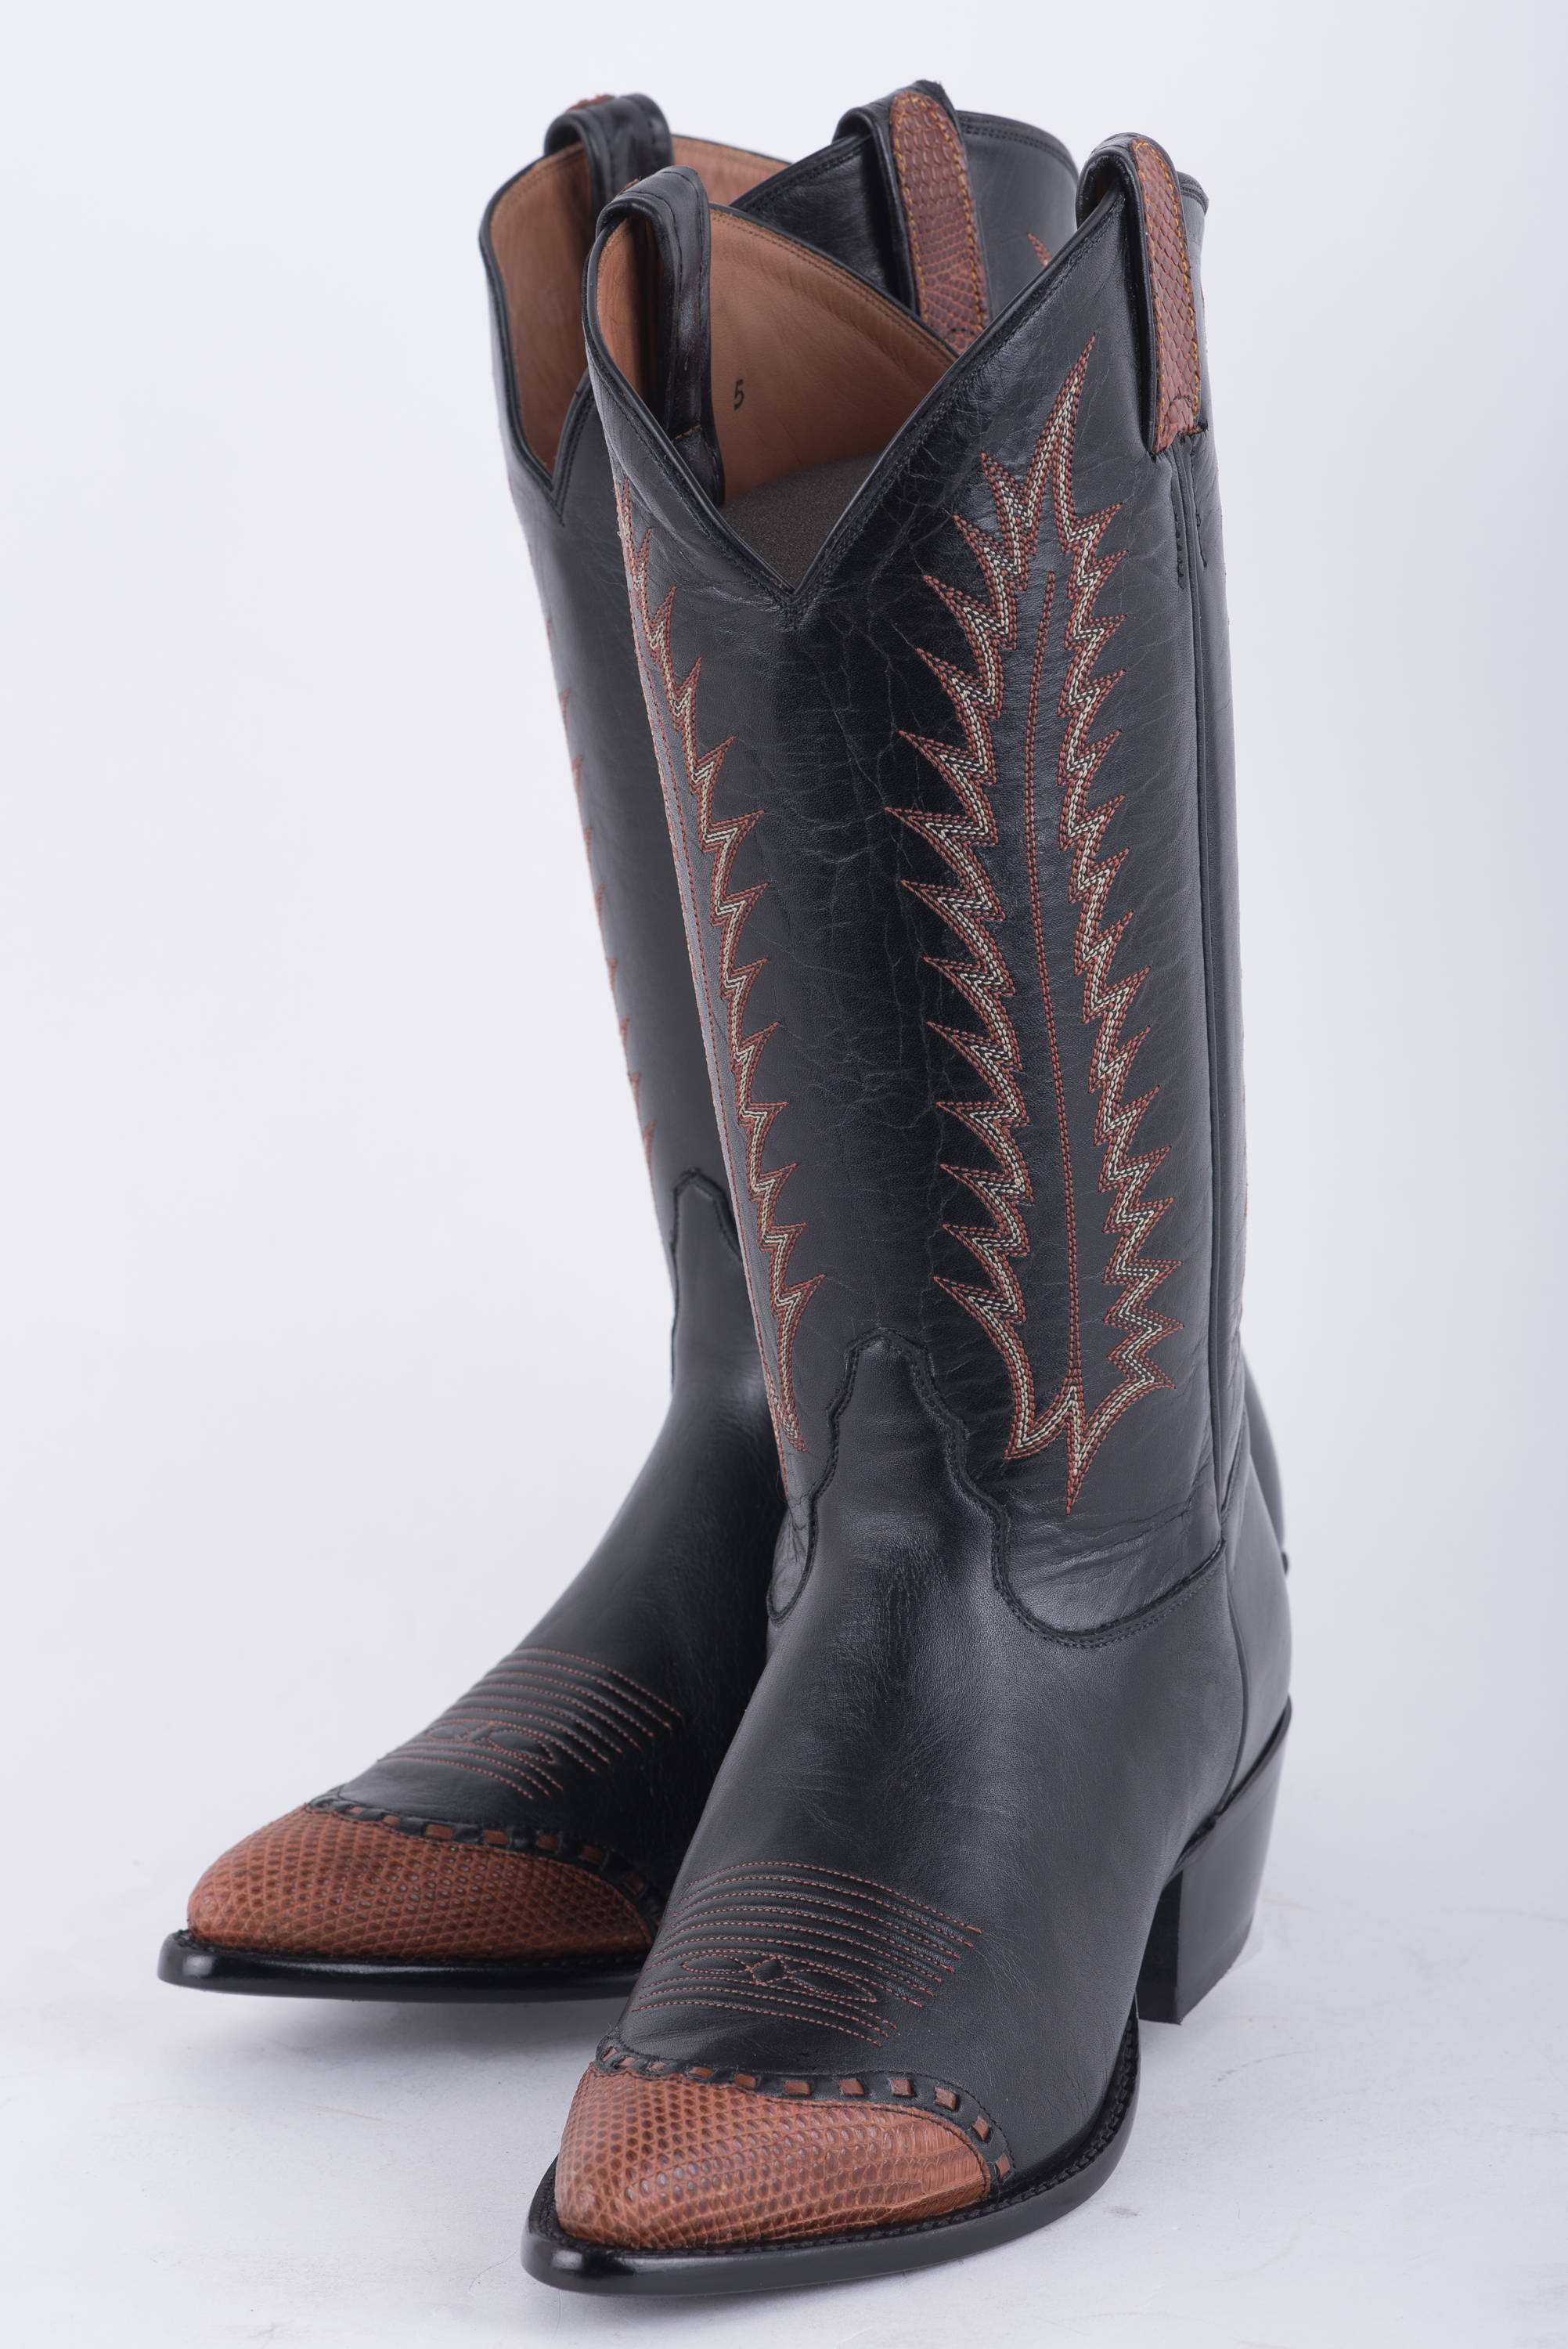 Handmade leather cowboy boots at the Houston Rodeo